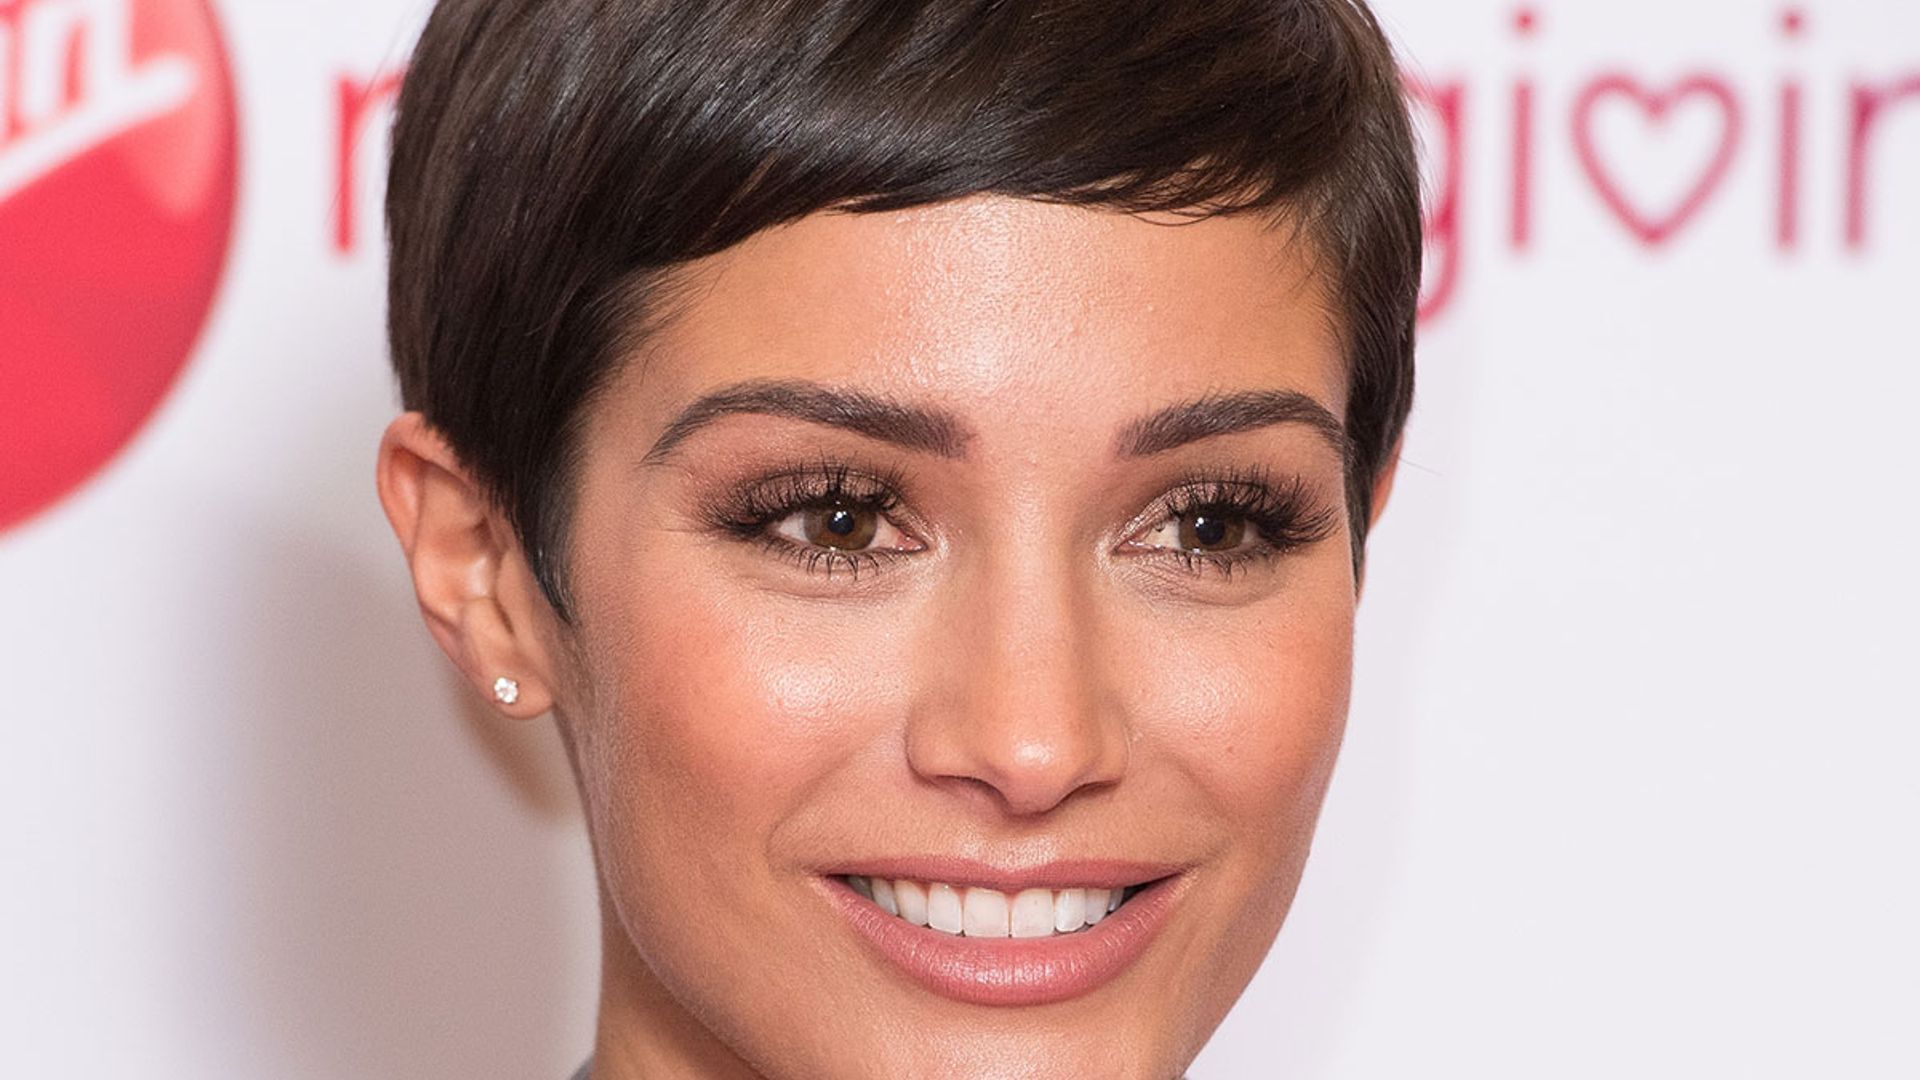 Frankie Bridge bravely shares eating disorder past and ongoing body confidence struggles